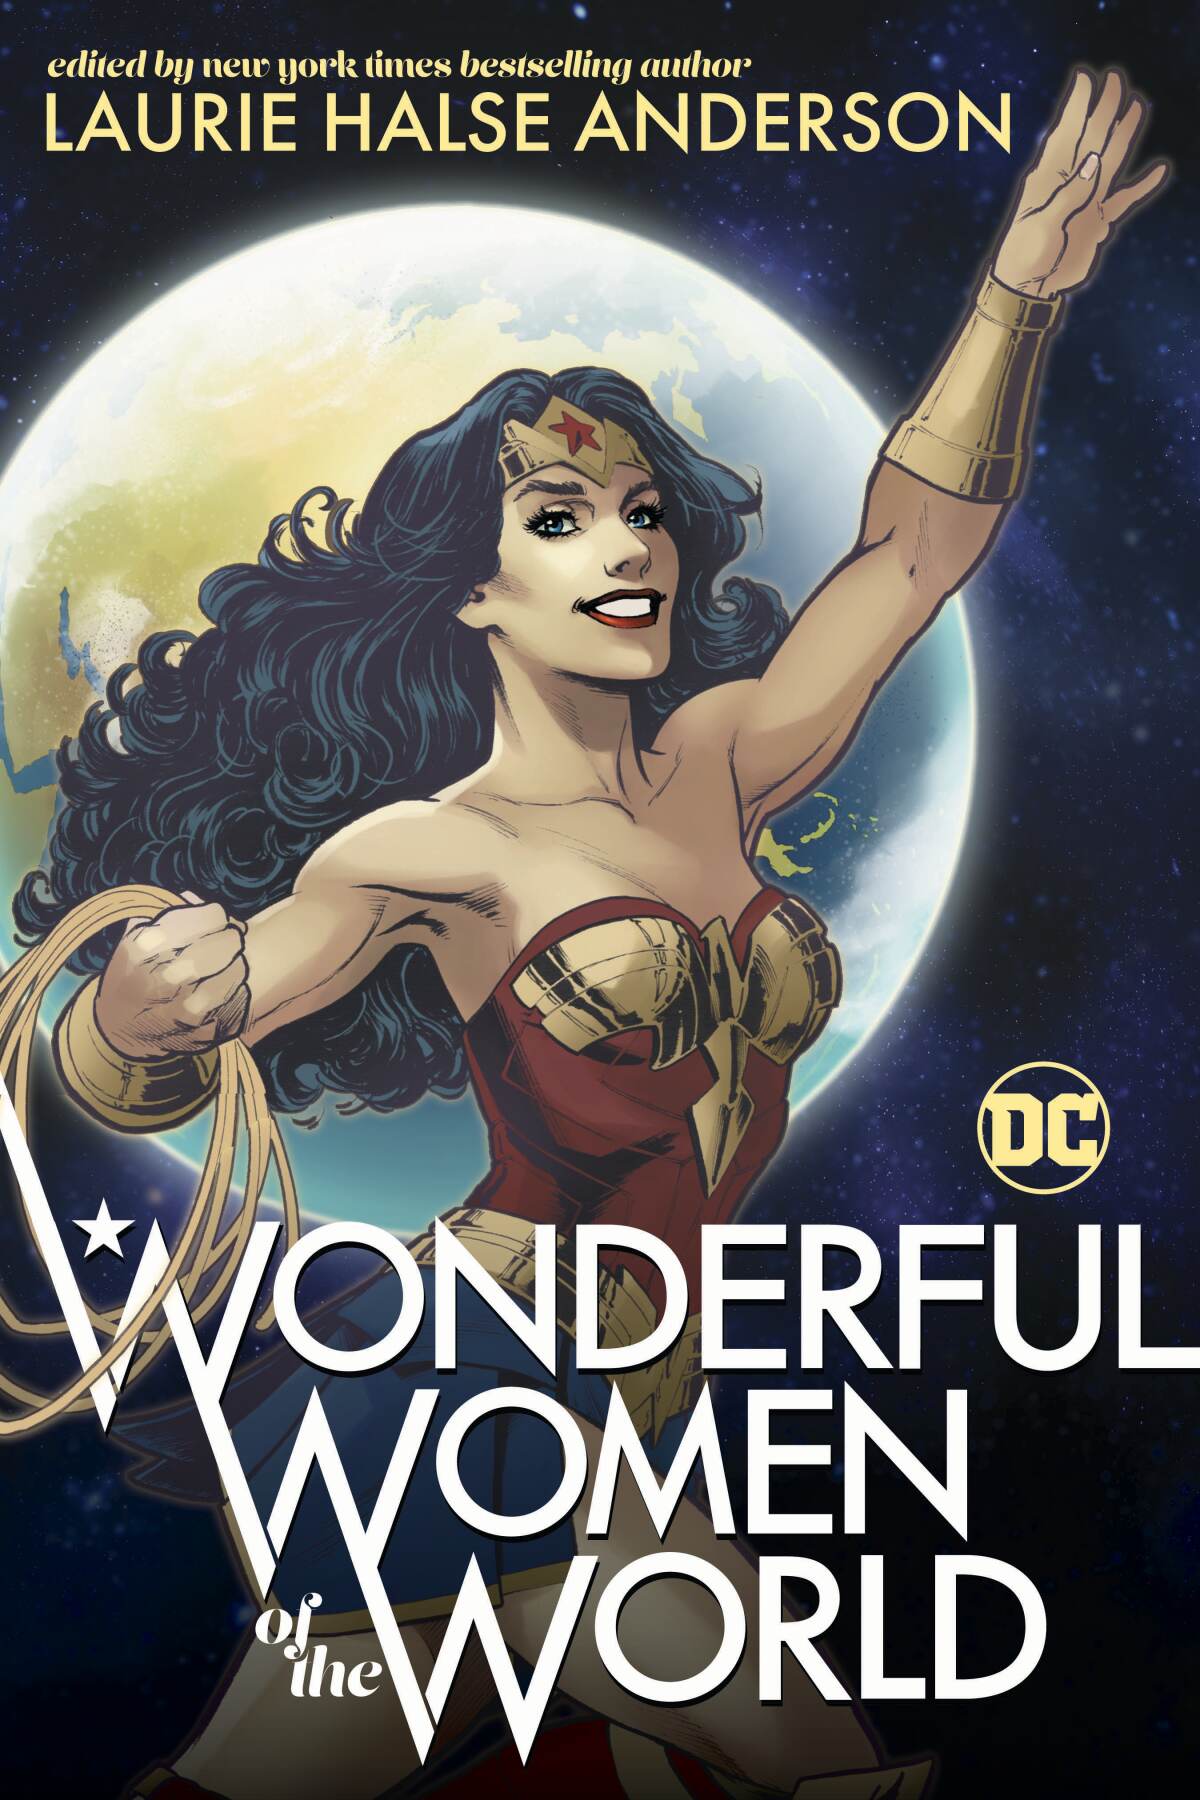 "Wonderful Women of the World" by DC, edited by Laurie Haise Anderson.